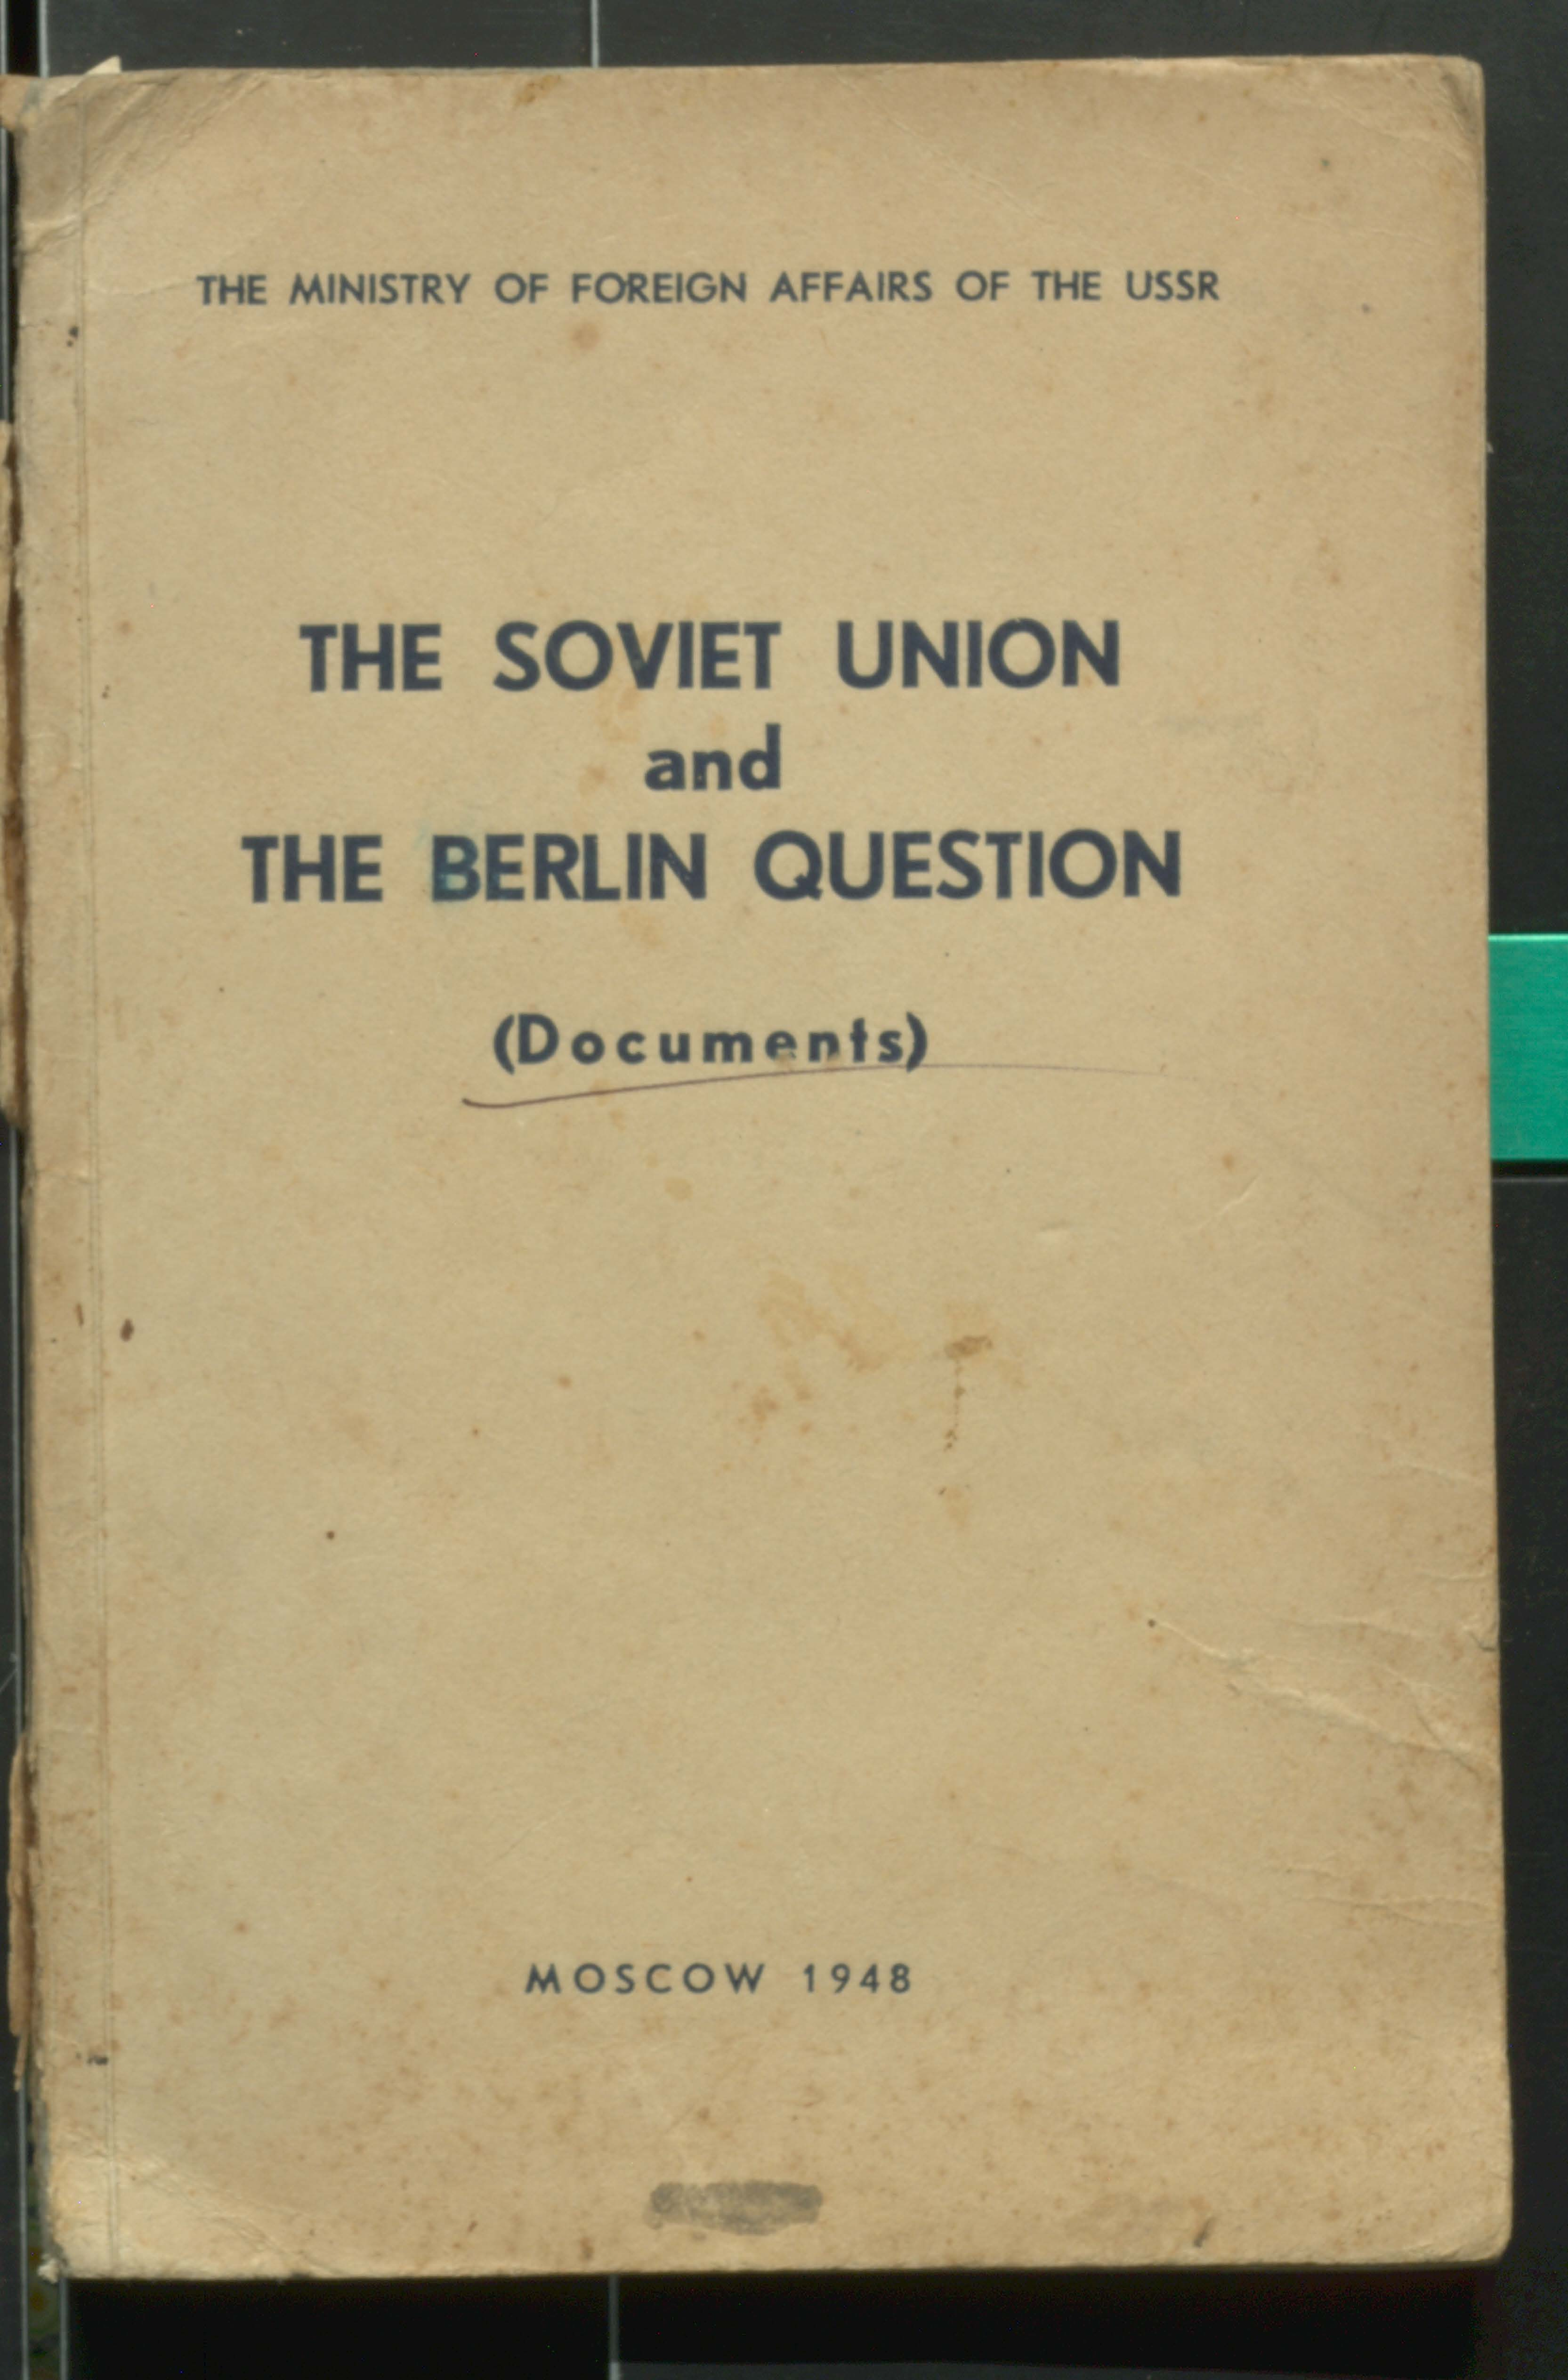 The  Soviet Union and the berlin question document